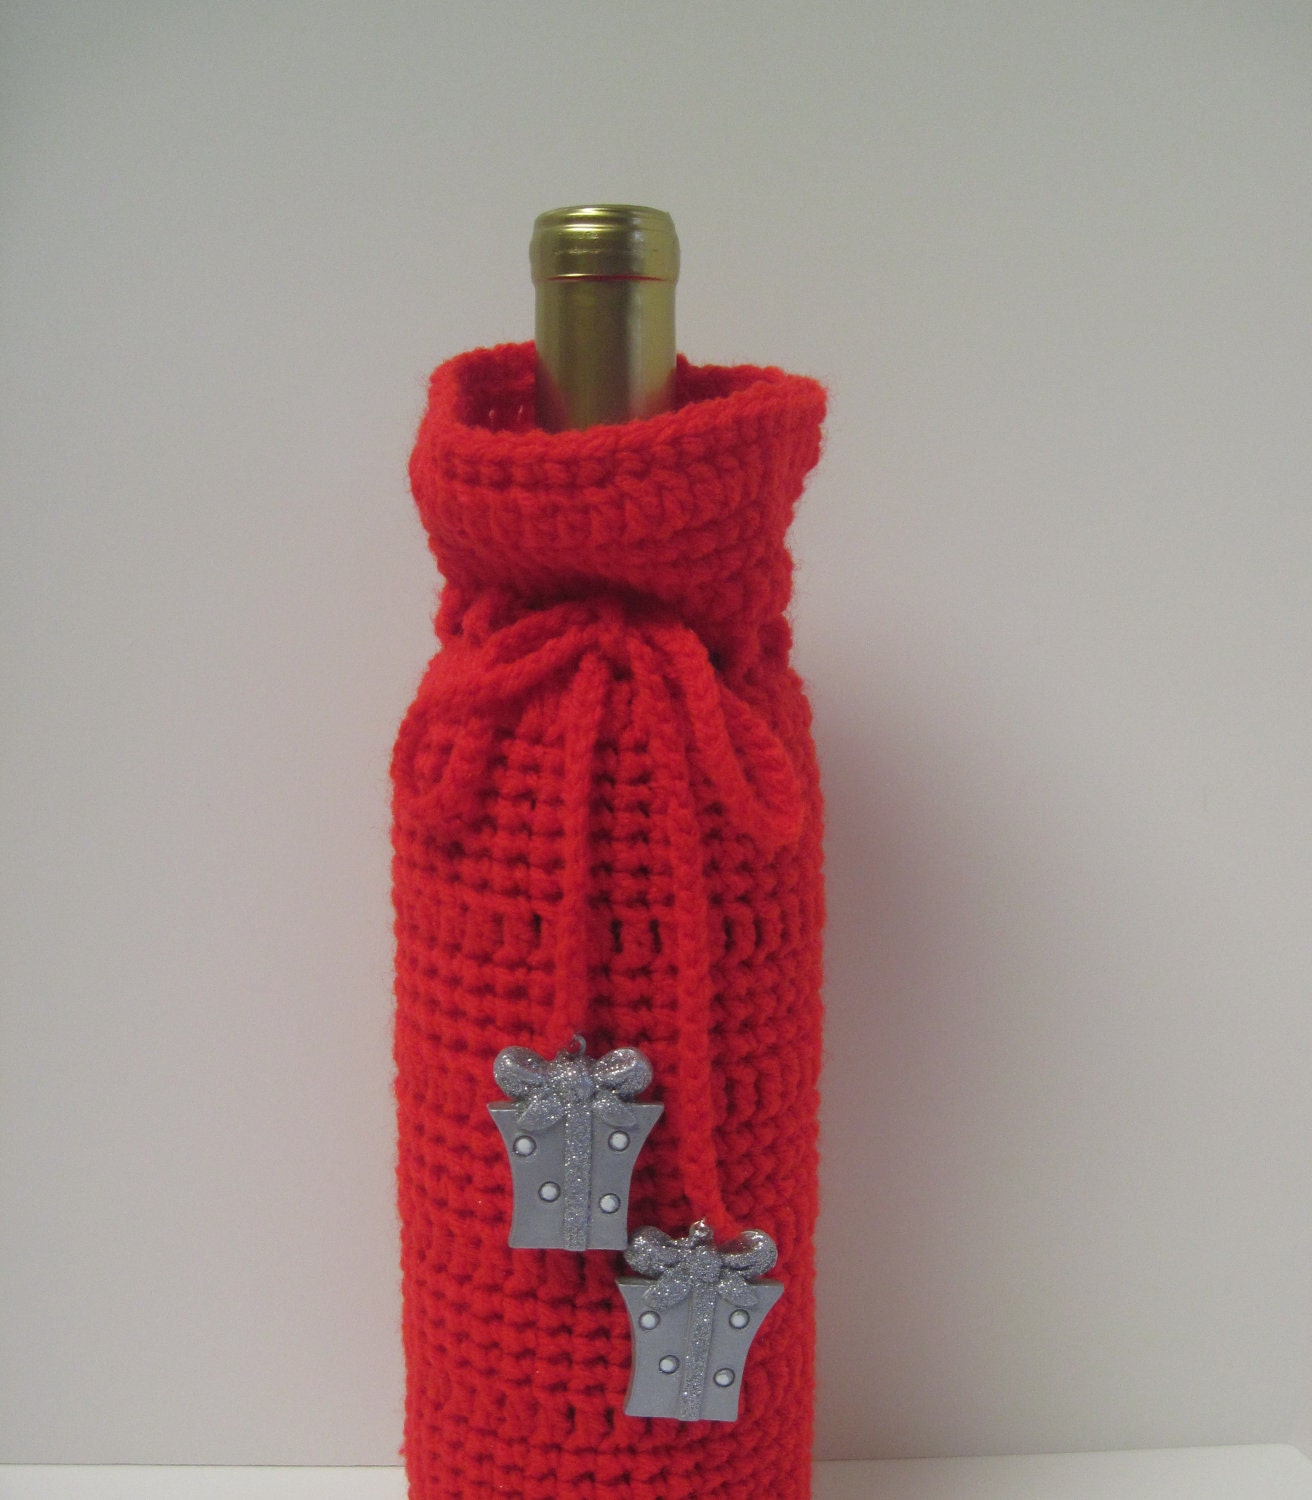 Red Crochet Wine Bottle Covers Sacks Gift Bags: Red with Silver Glitter Packages